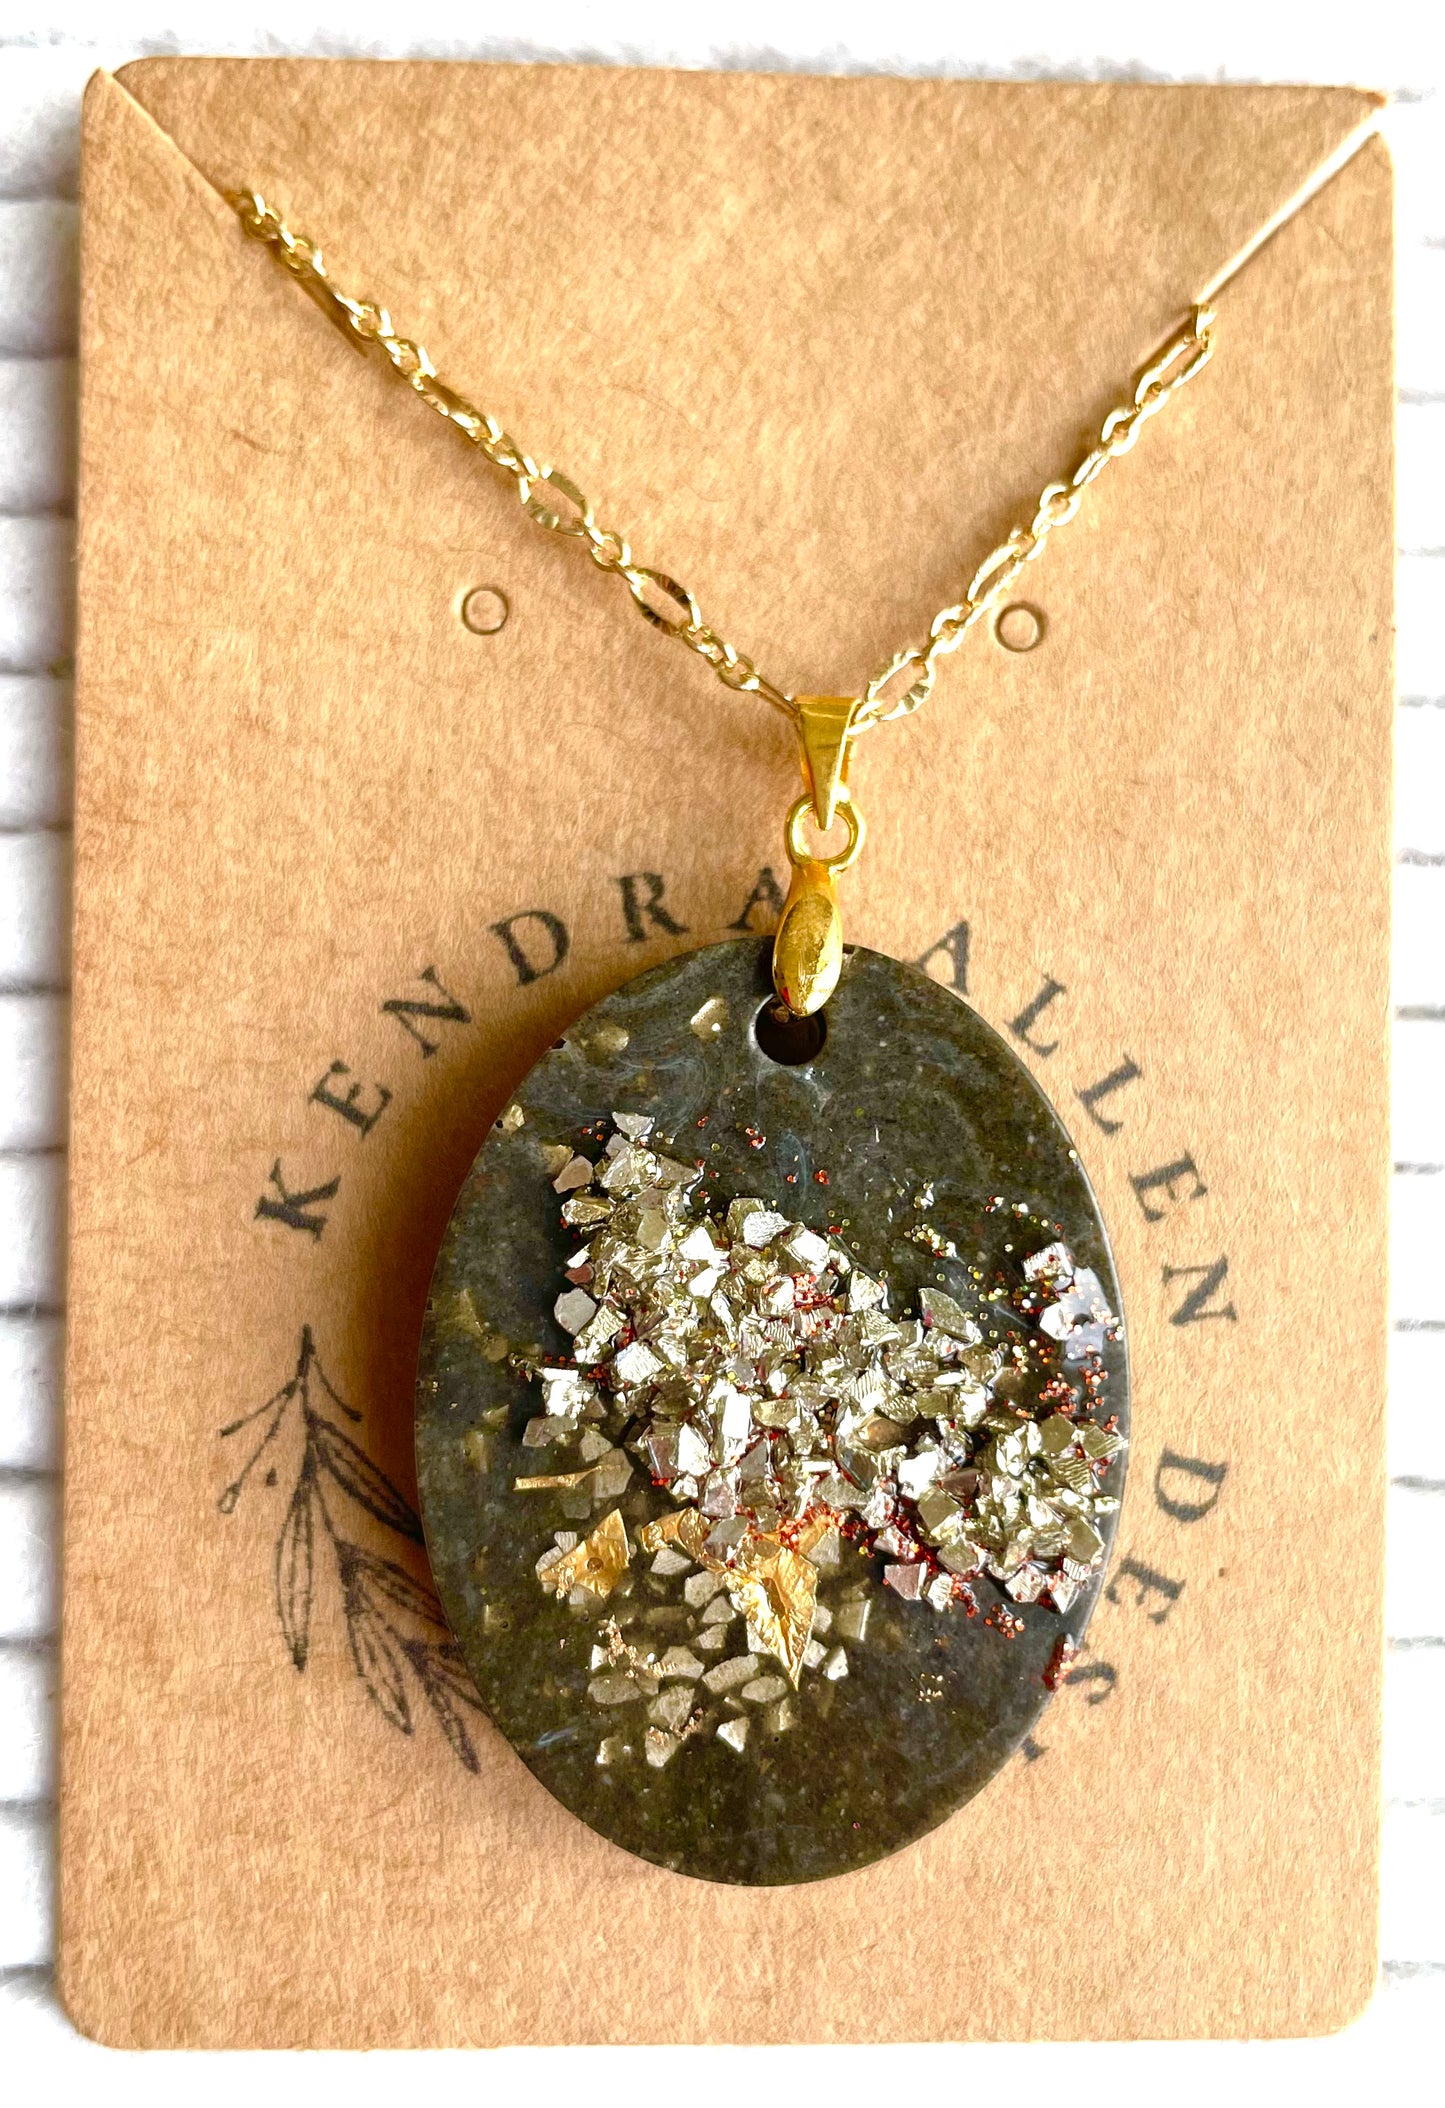 Oblong resin and cement necklace